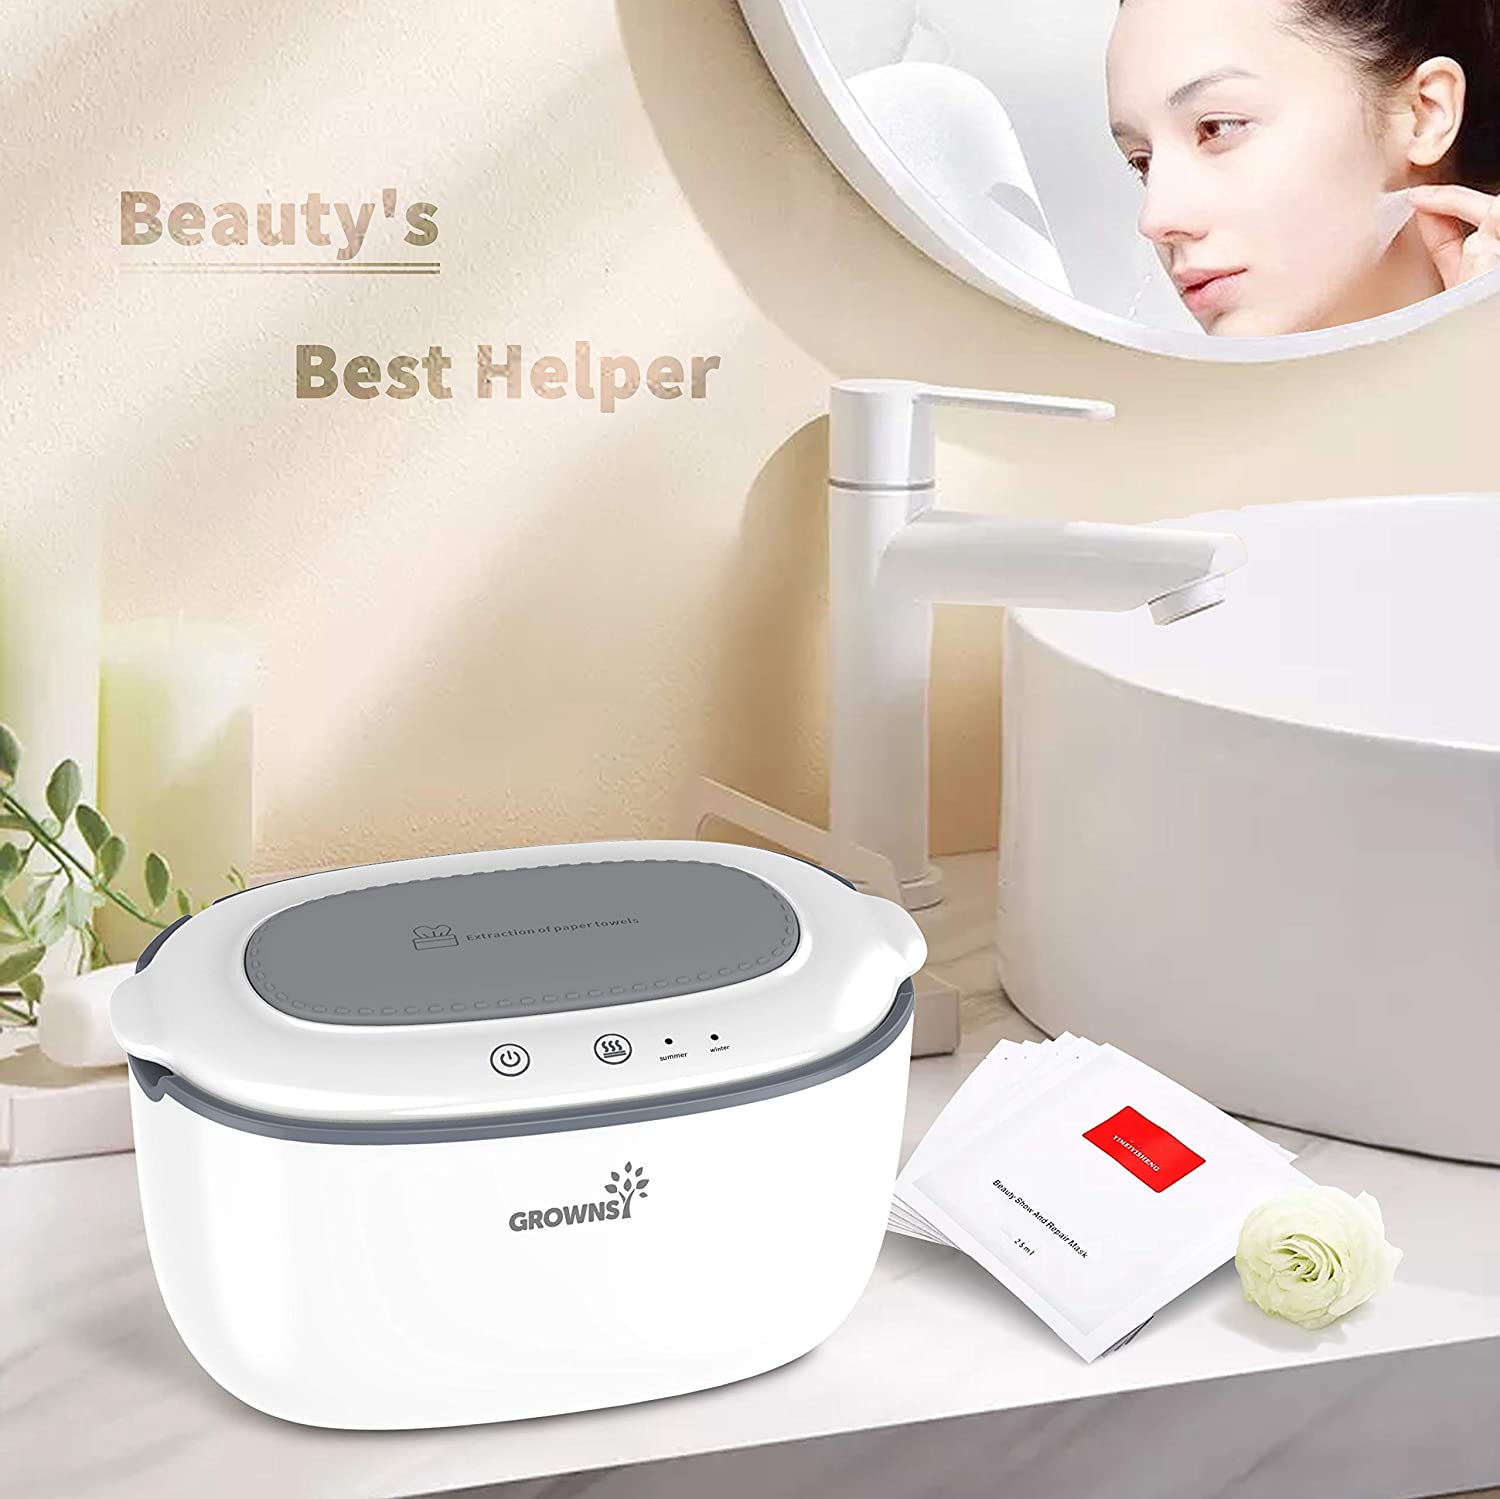 Choose the wipe heater that suits you best